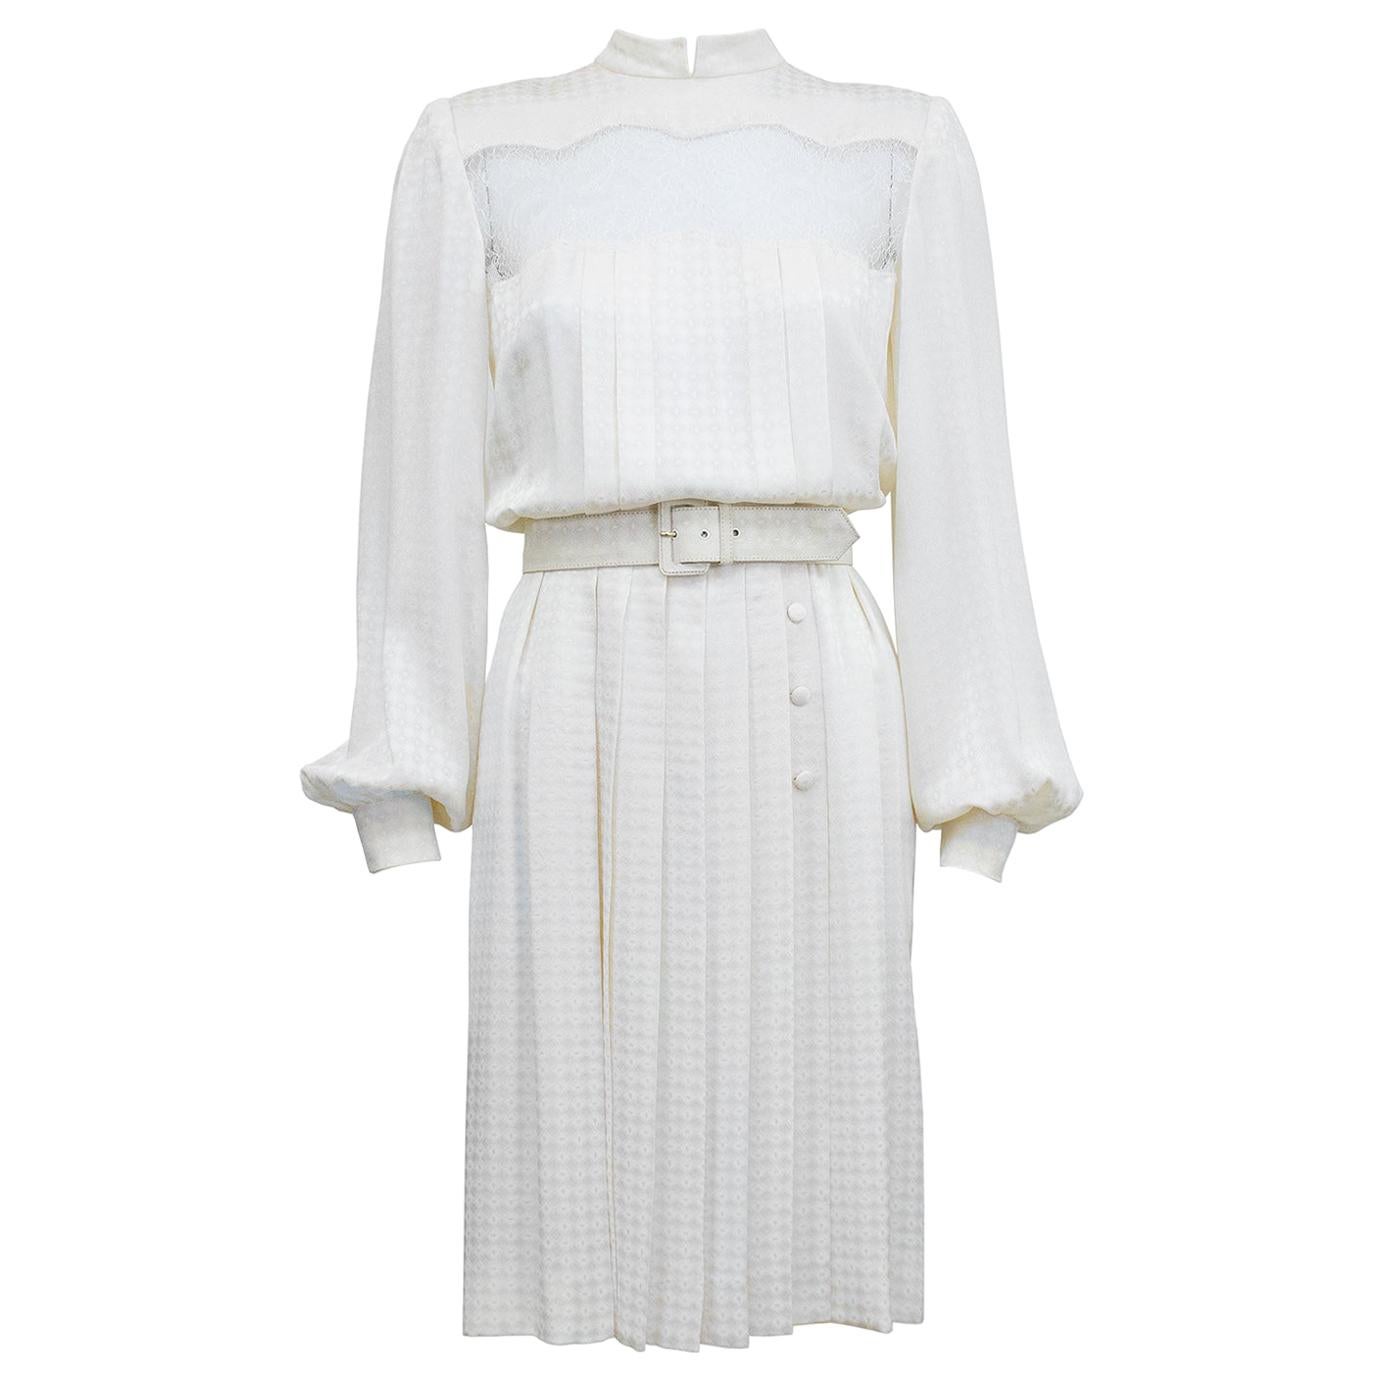 1980s Andre Laug Cream Silk Jacquard and Lace Dress  For Sale